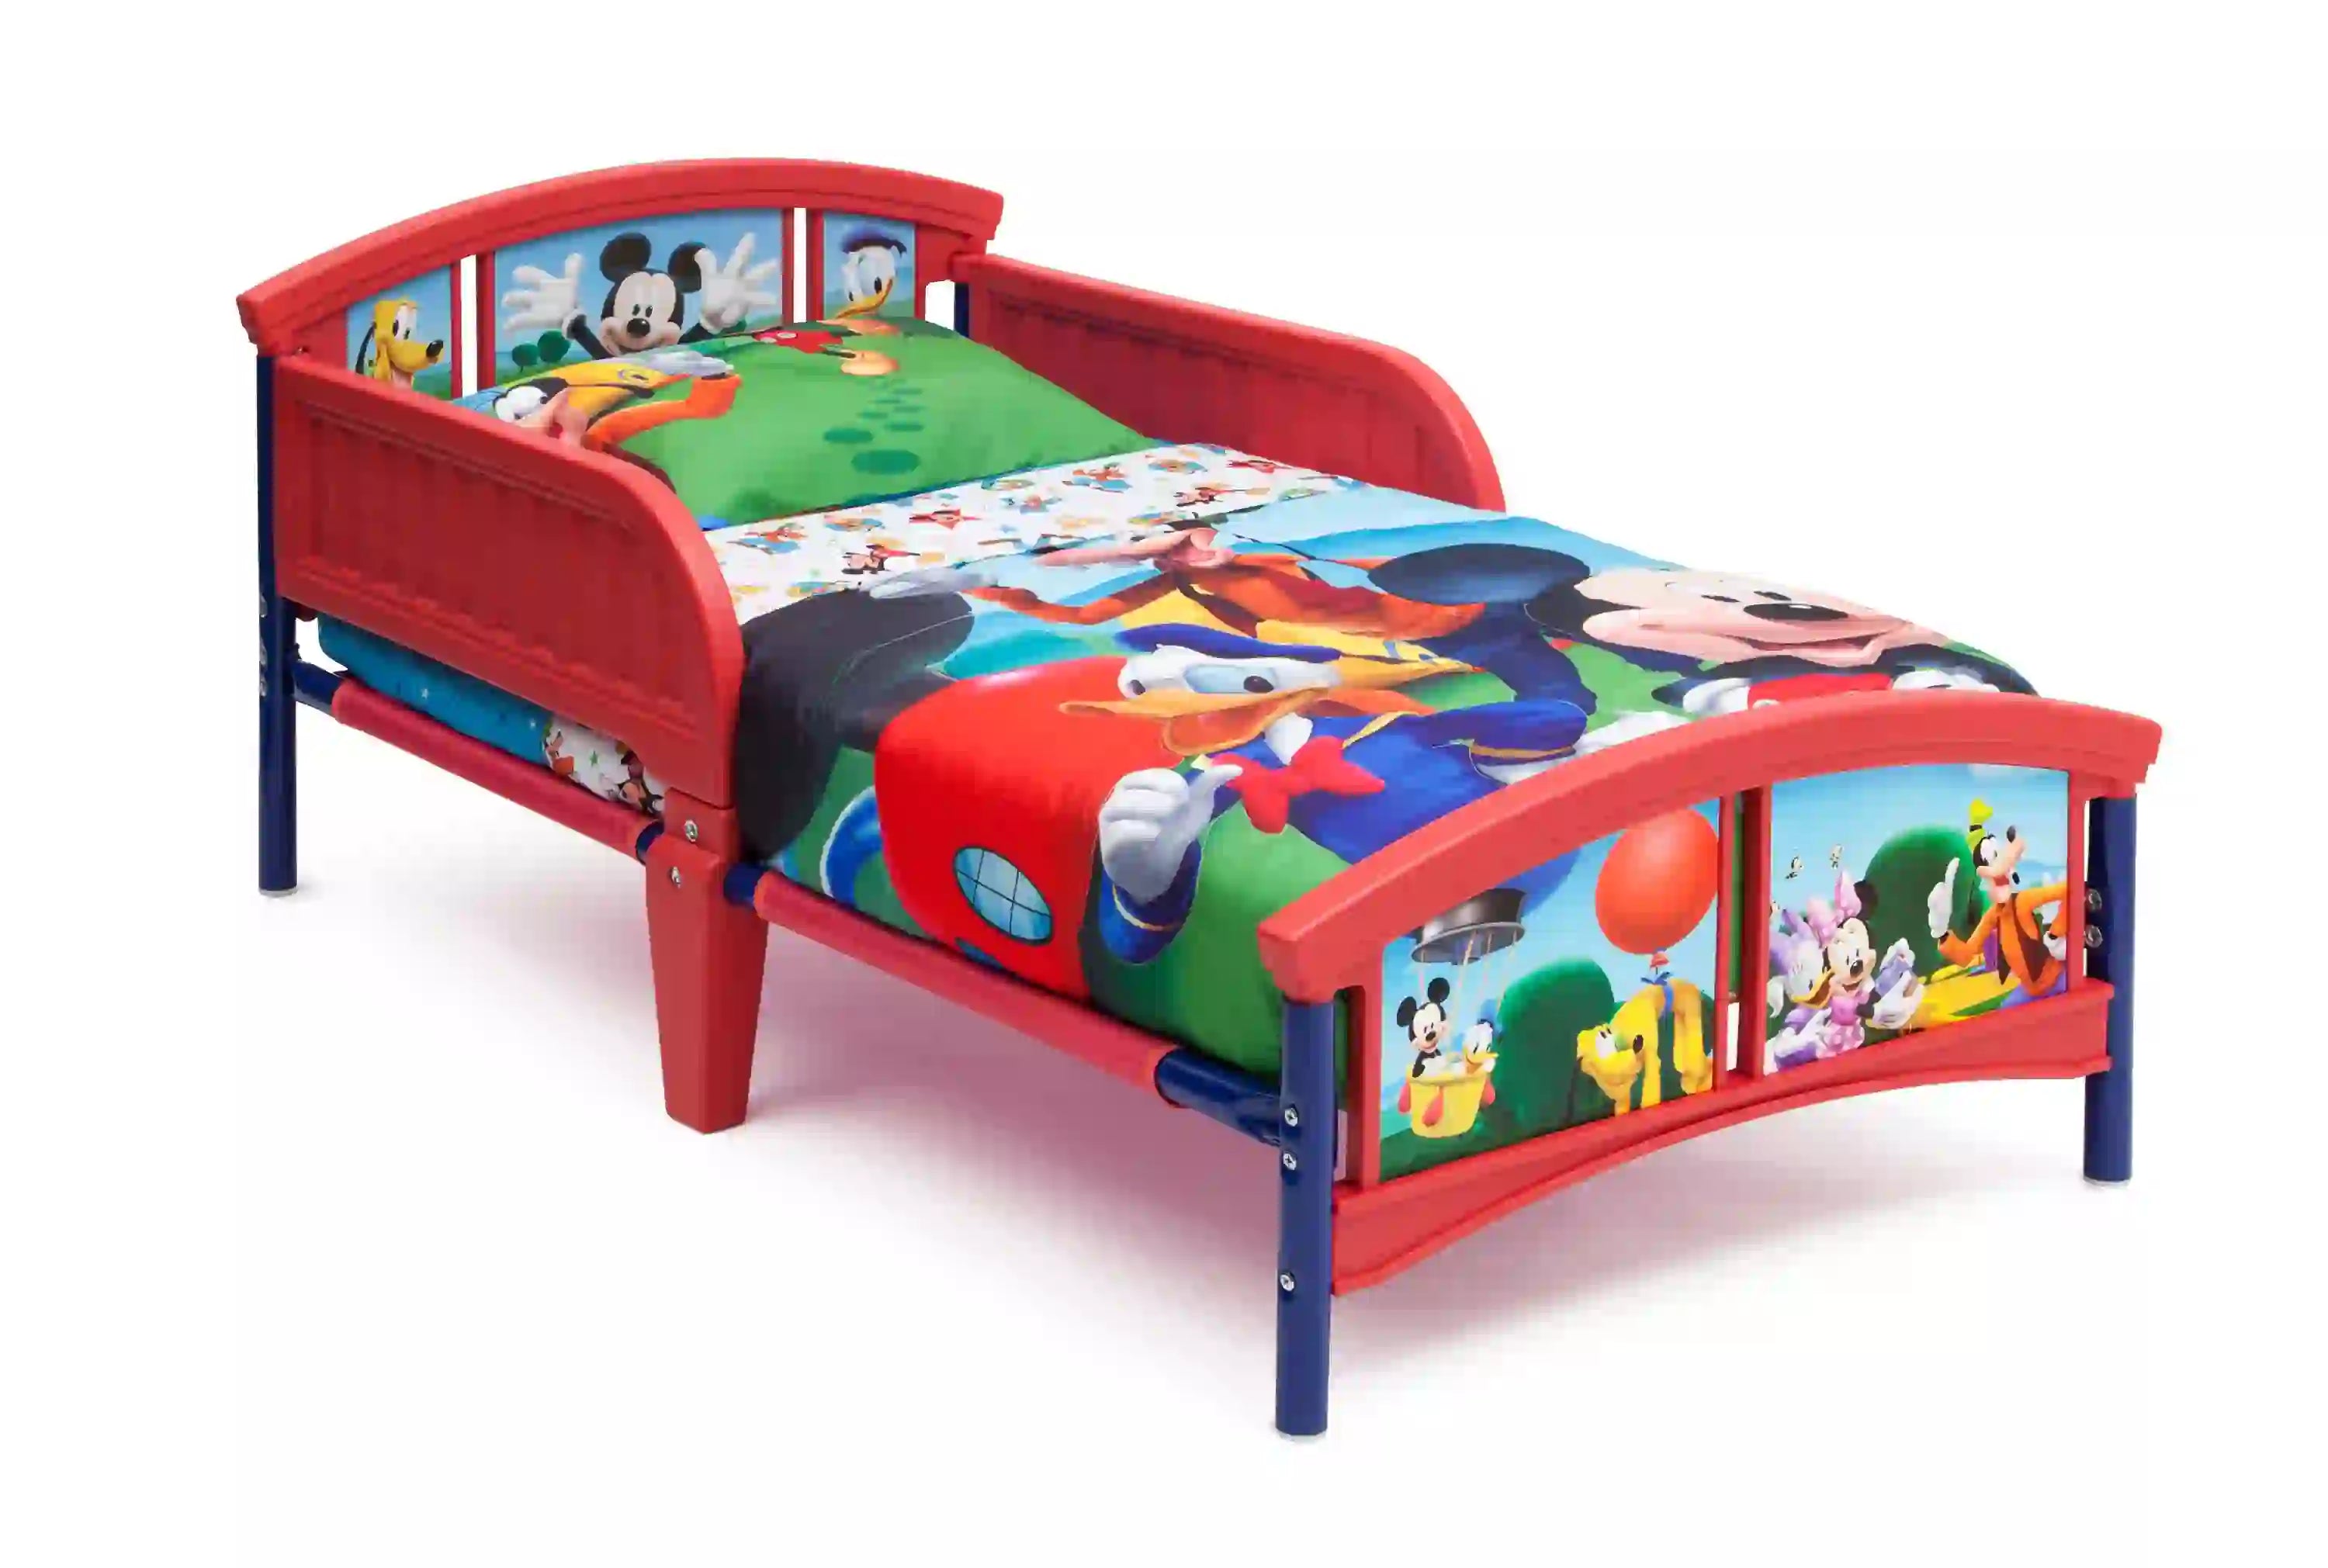 Delta Children - Mickey Toddler Bed (Mattress Included)